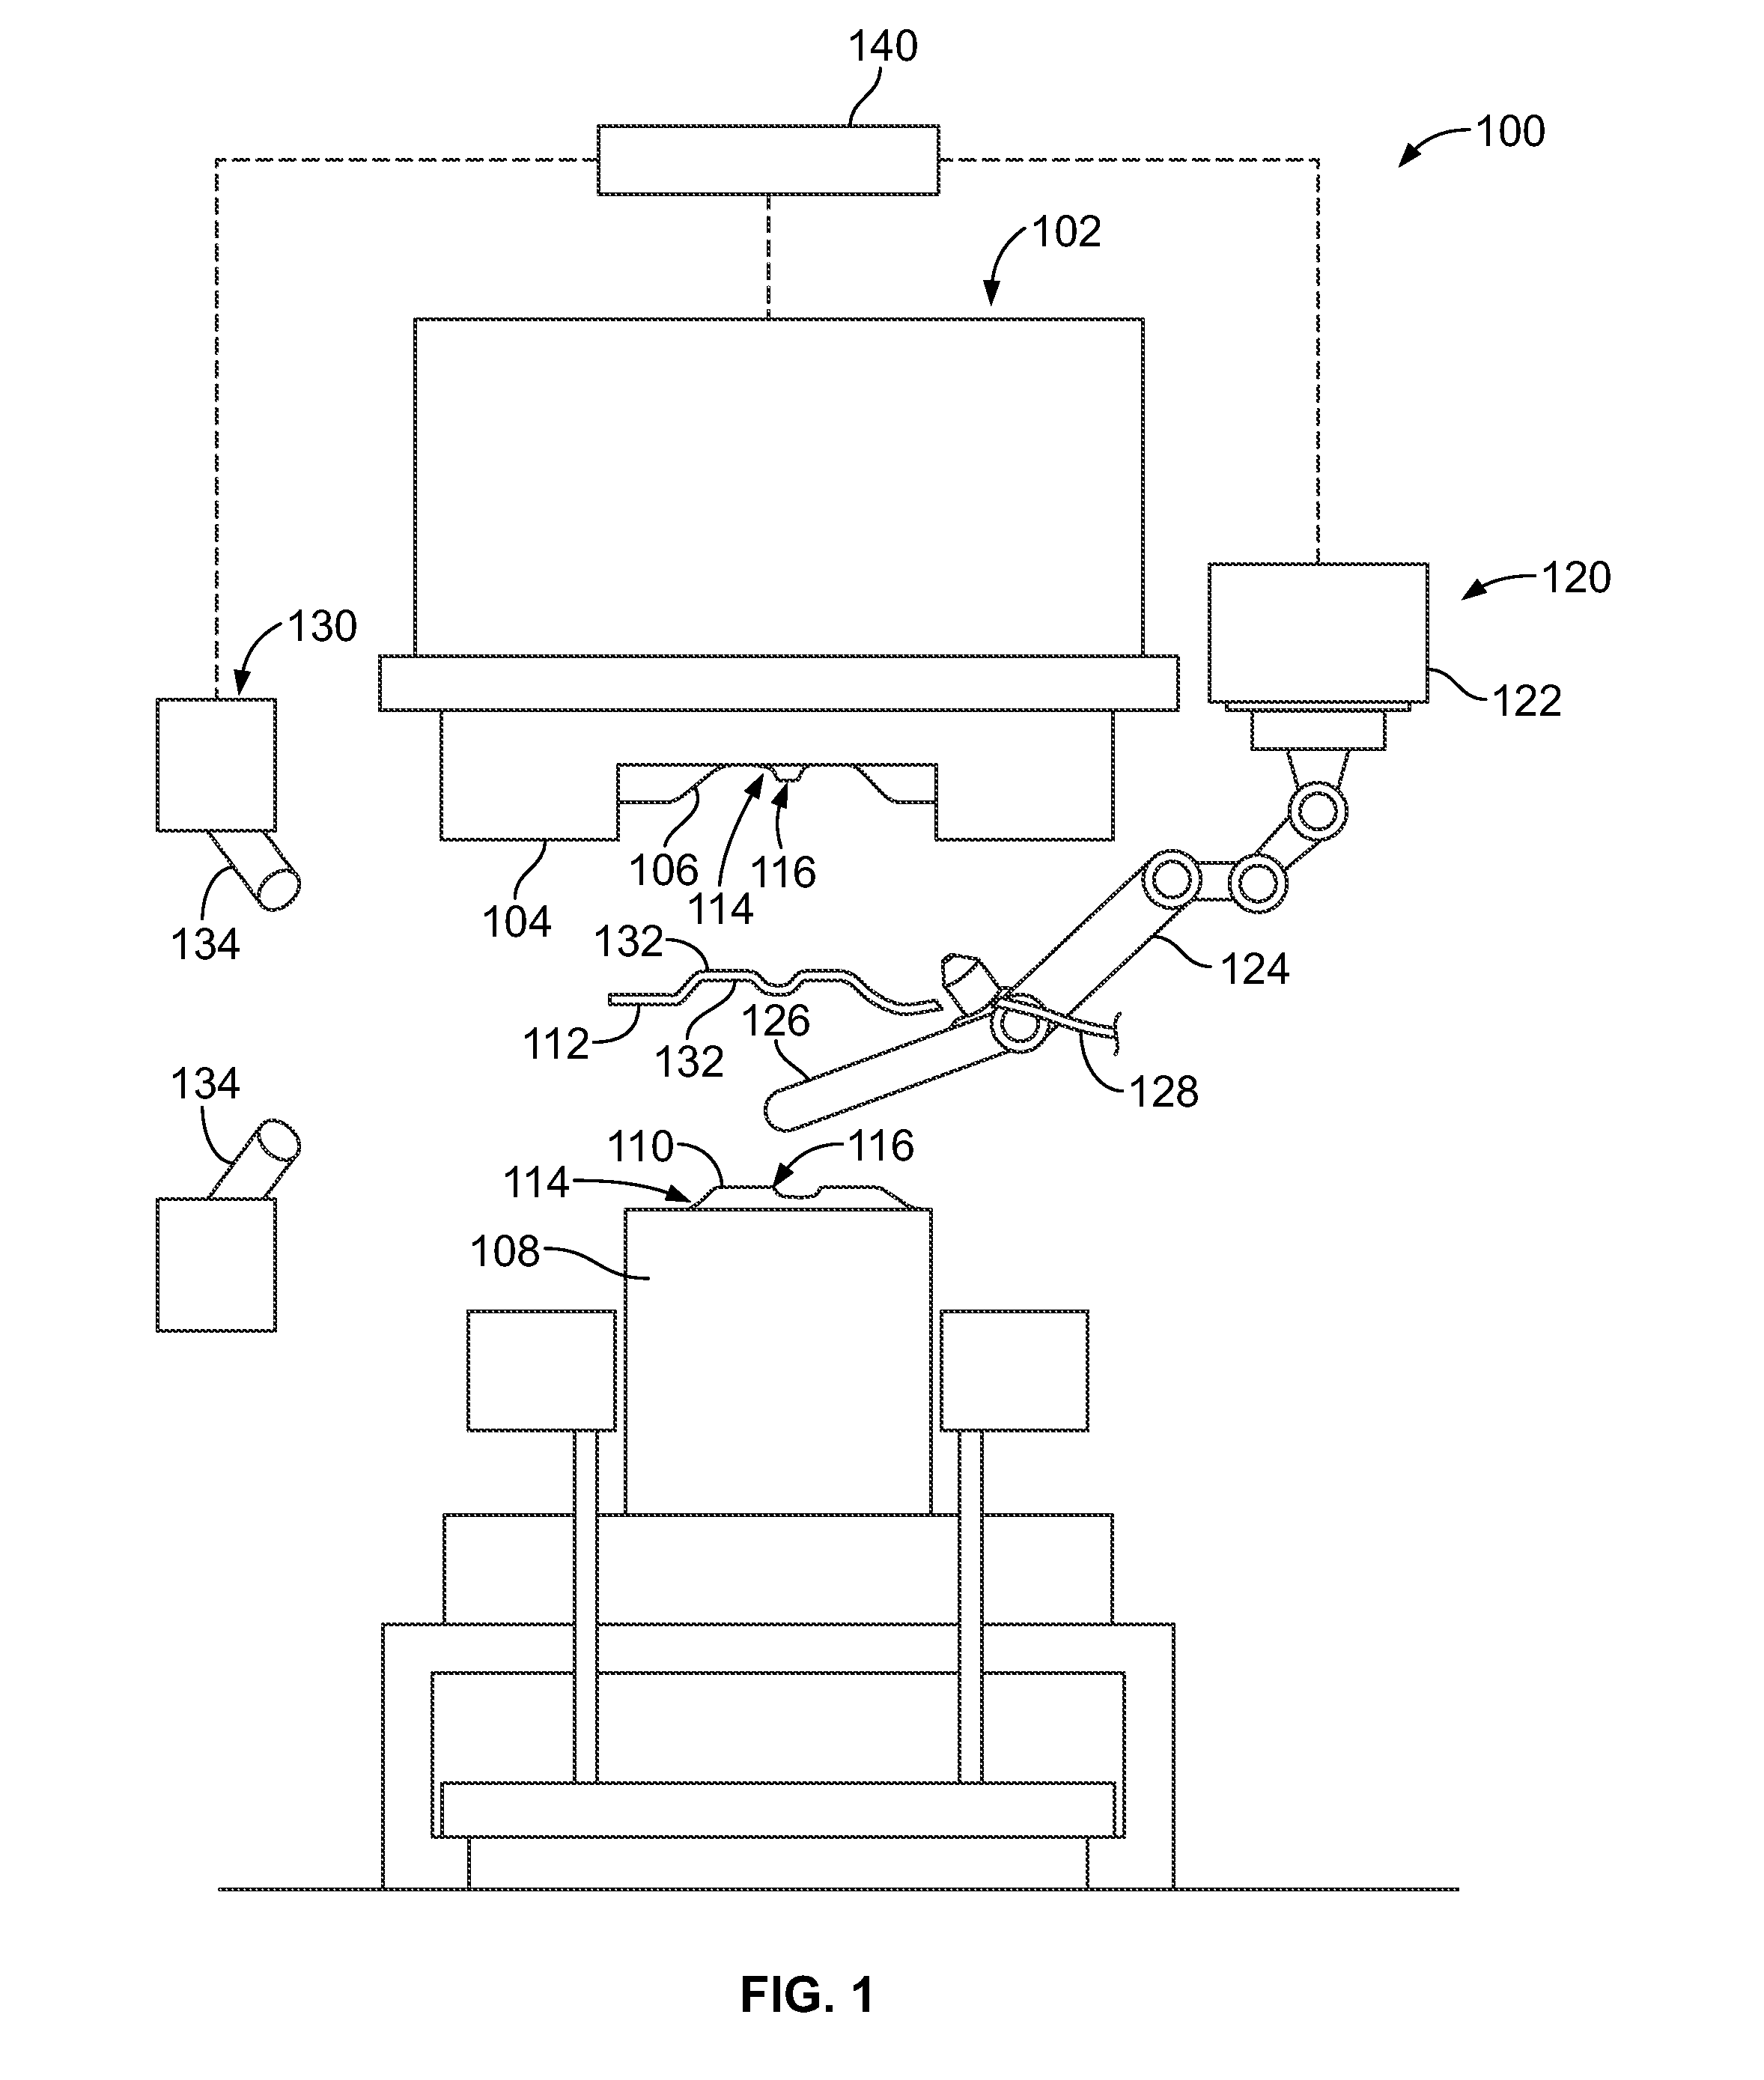 Methods and systems for target cleaning die surfaces of a die of a press machine